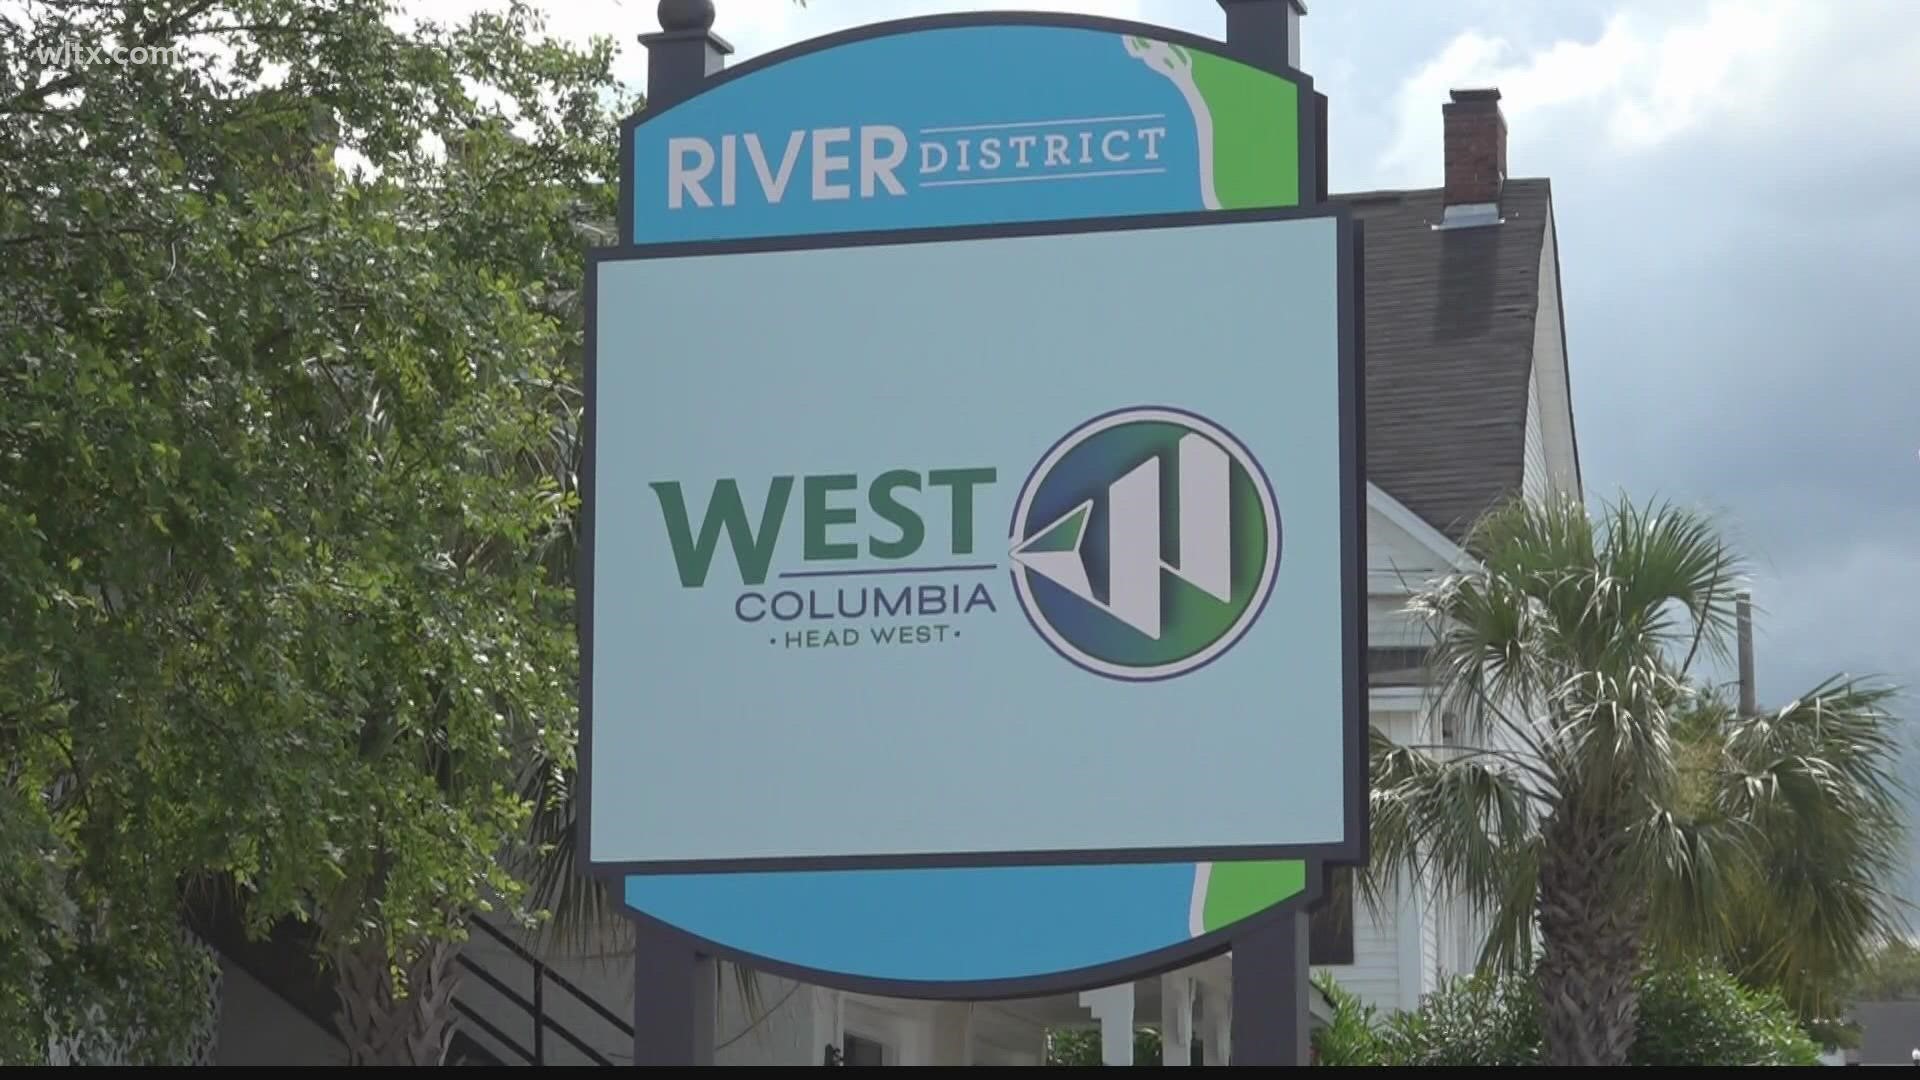 The City of West Columbia has approved a mask mandate within city limits as part of the effort to stop the rapid spread of the coronavirus.